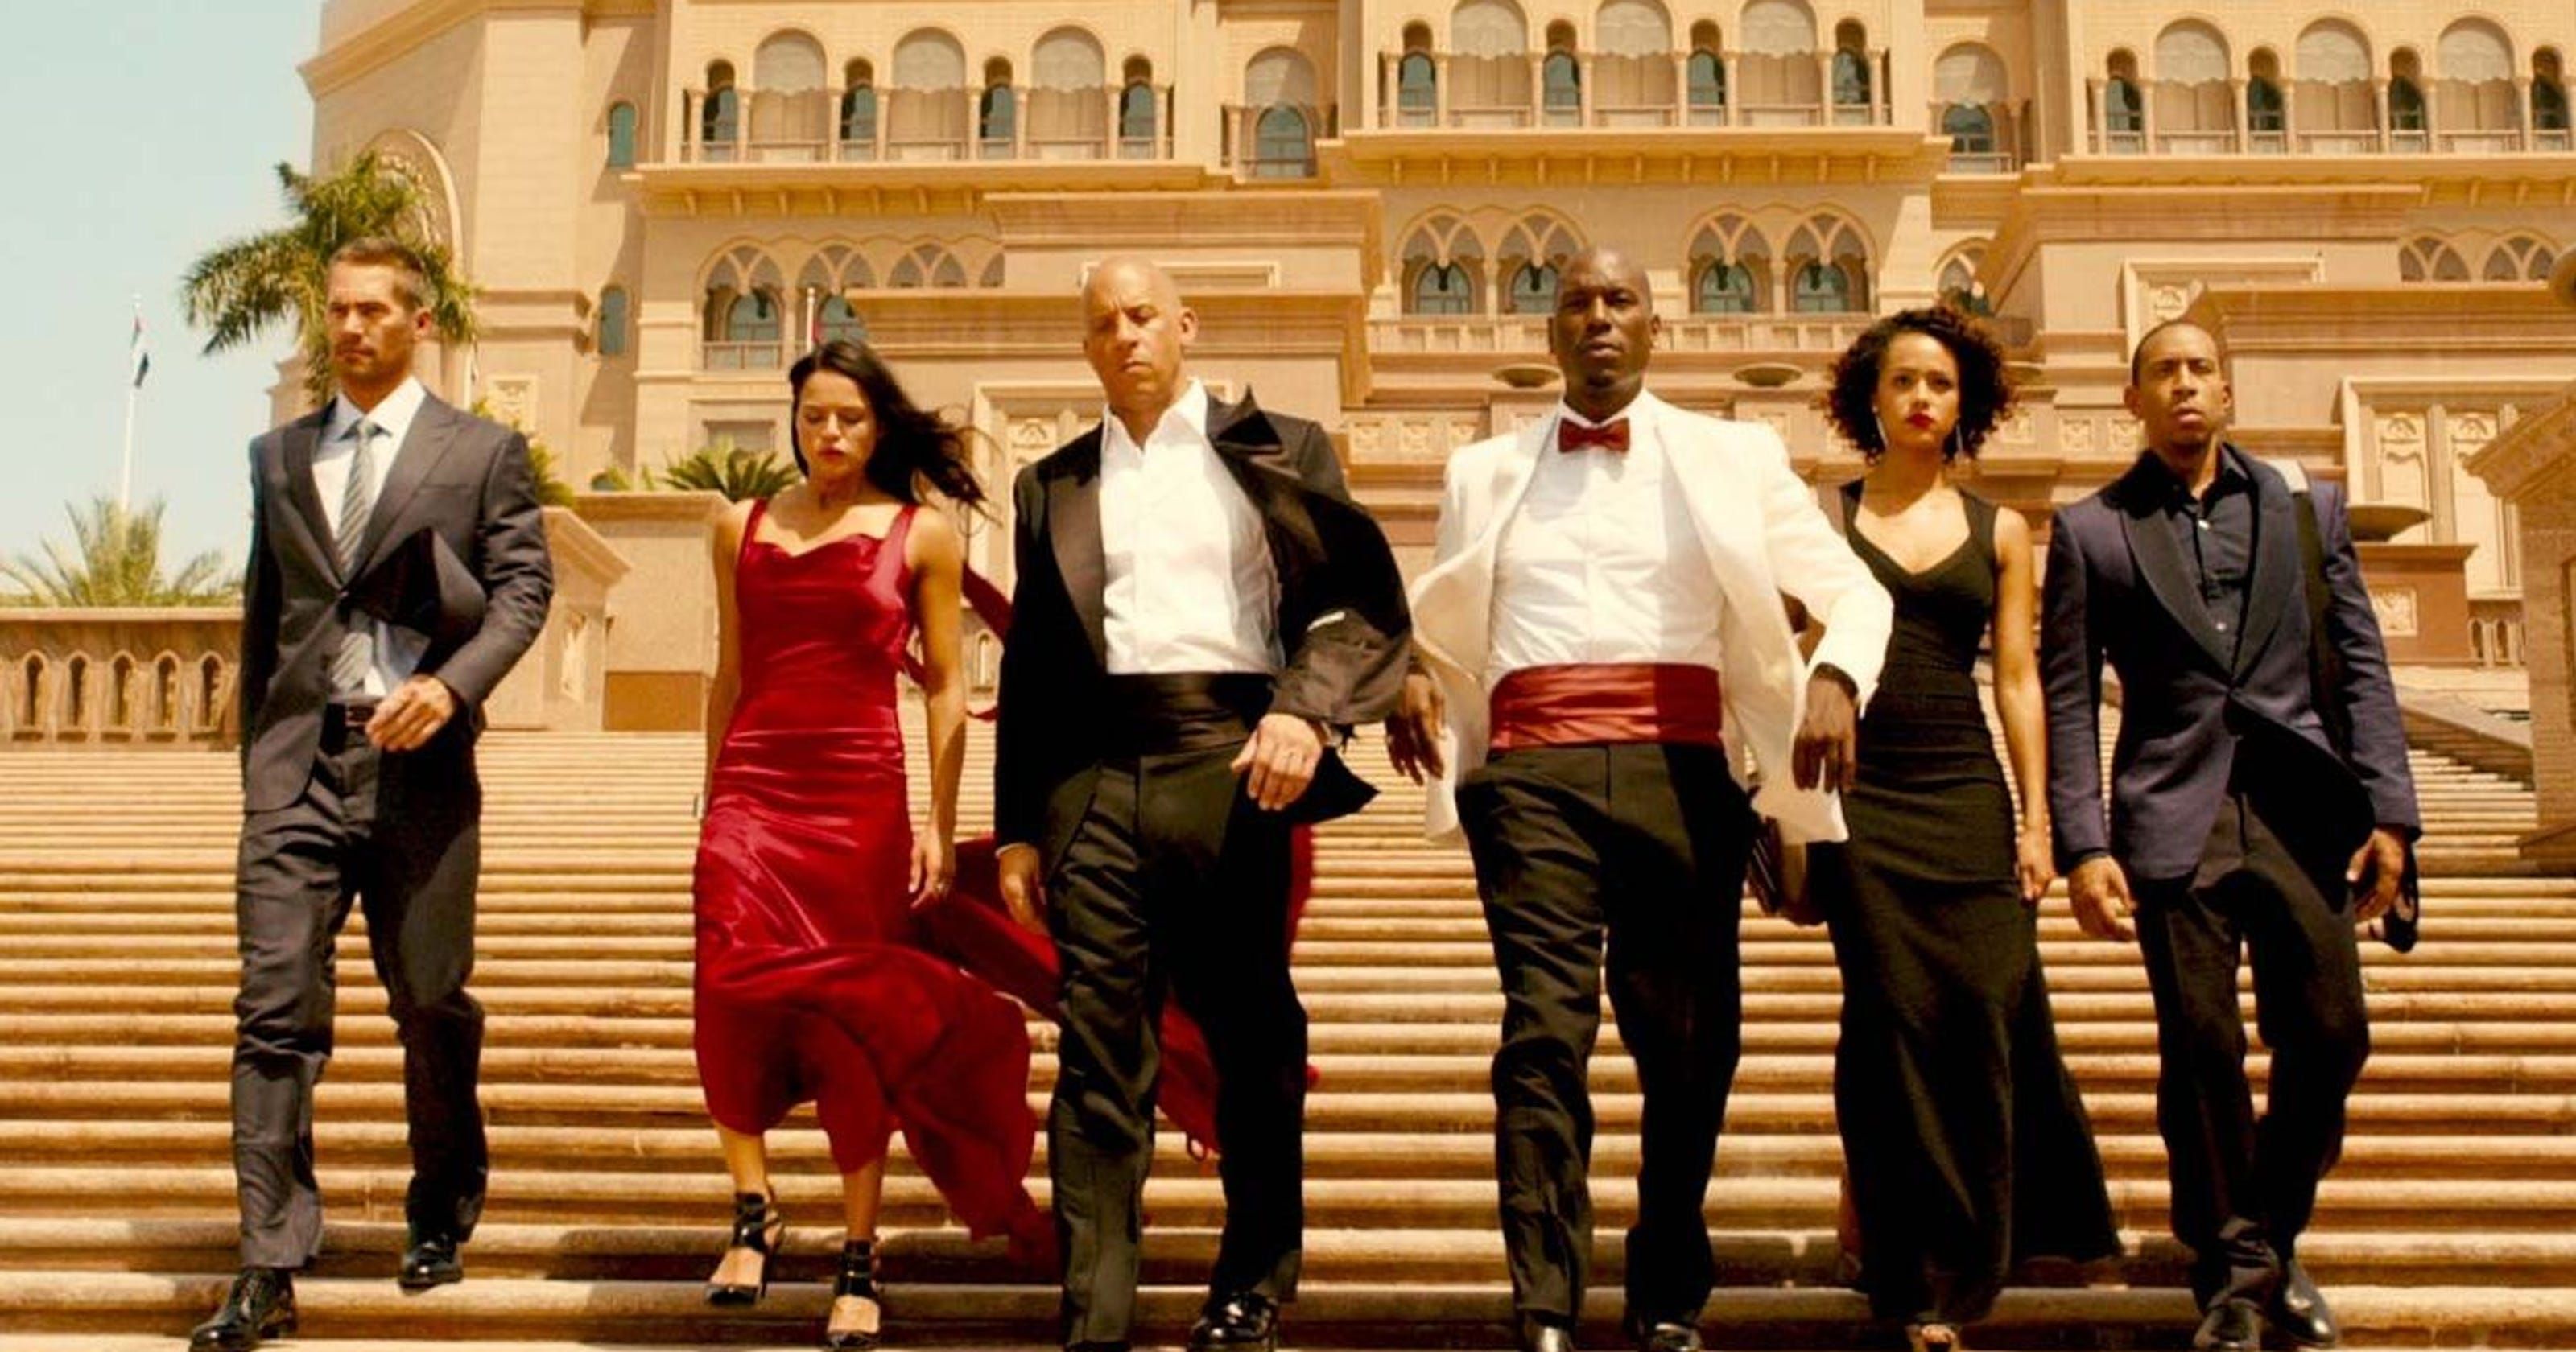 The Fast family in tuxedos and dresses in Dubai in Furious 7